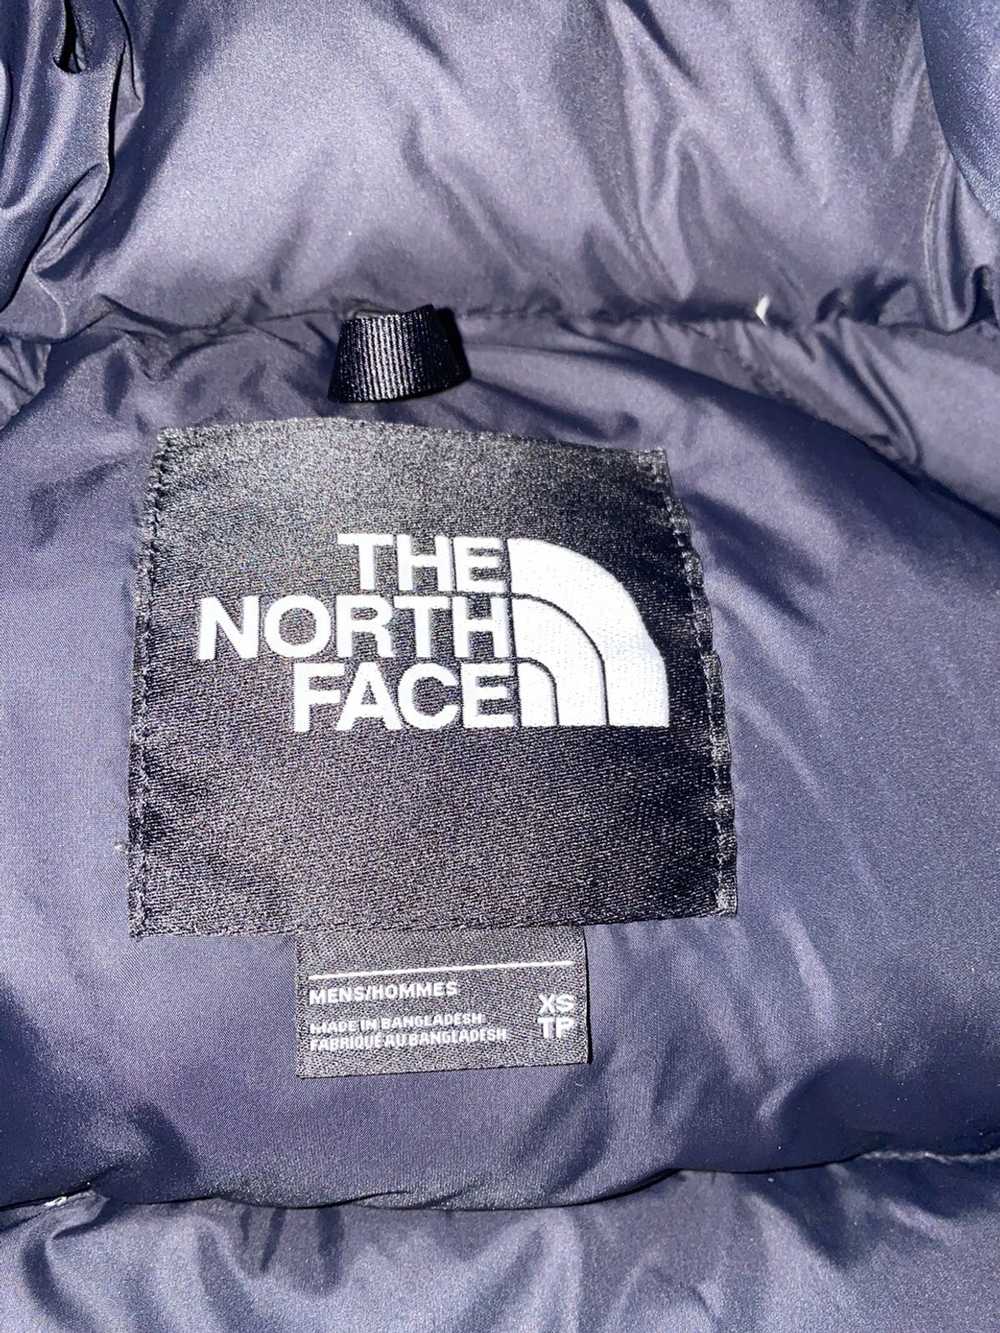 The North Face The North Face 700 Nuptse Puffer - image 2